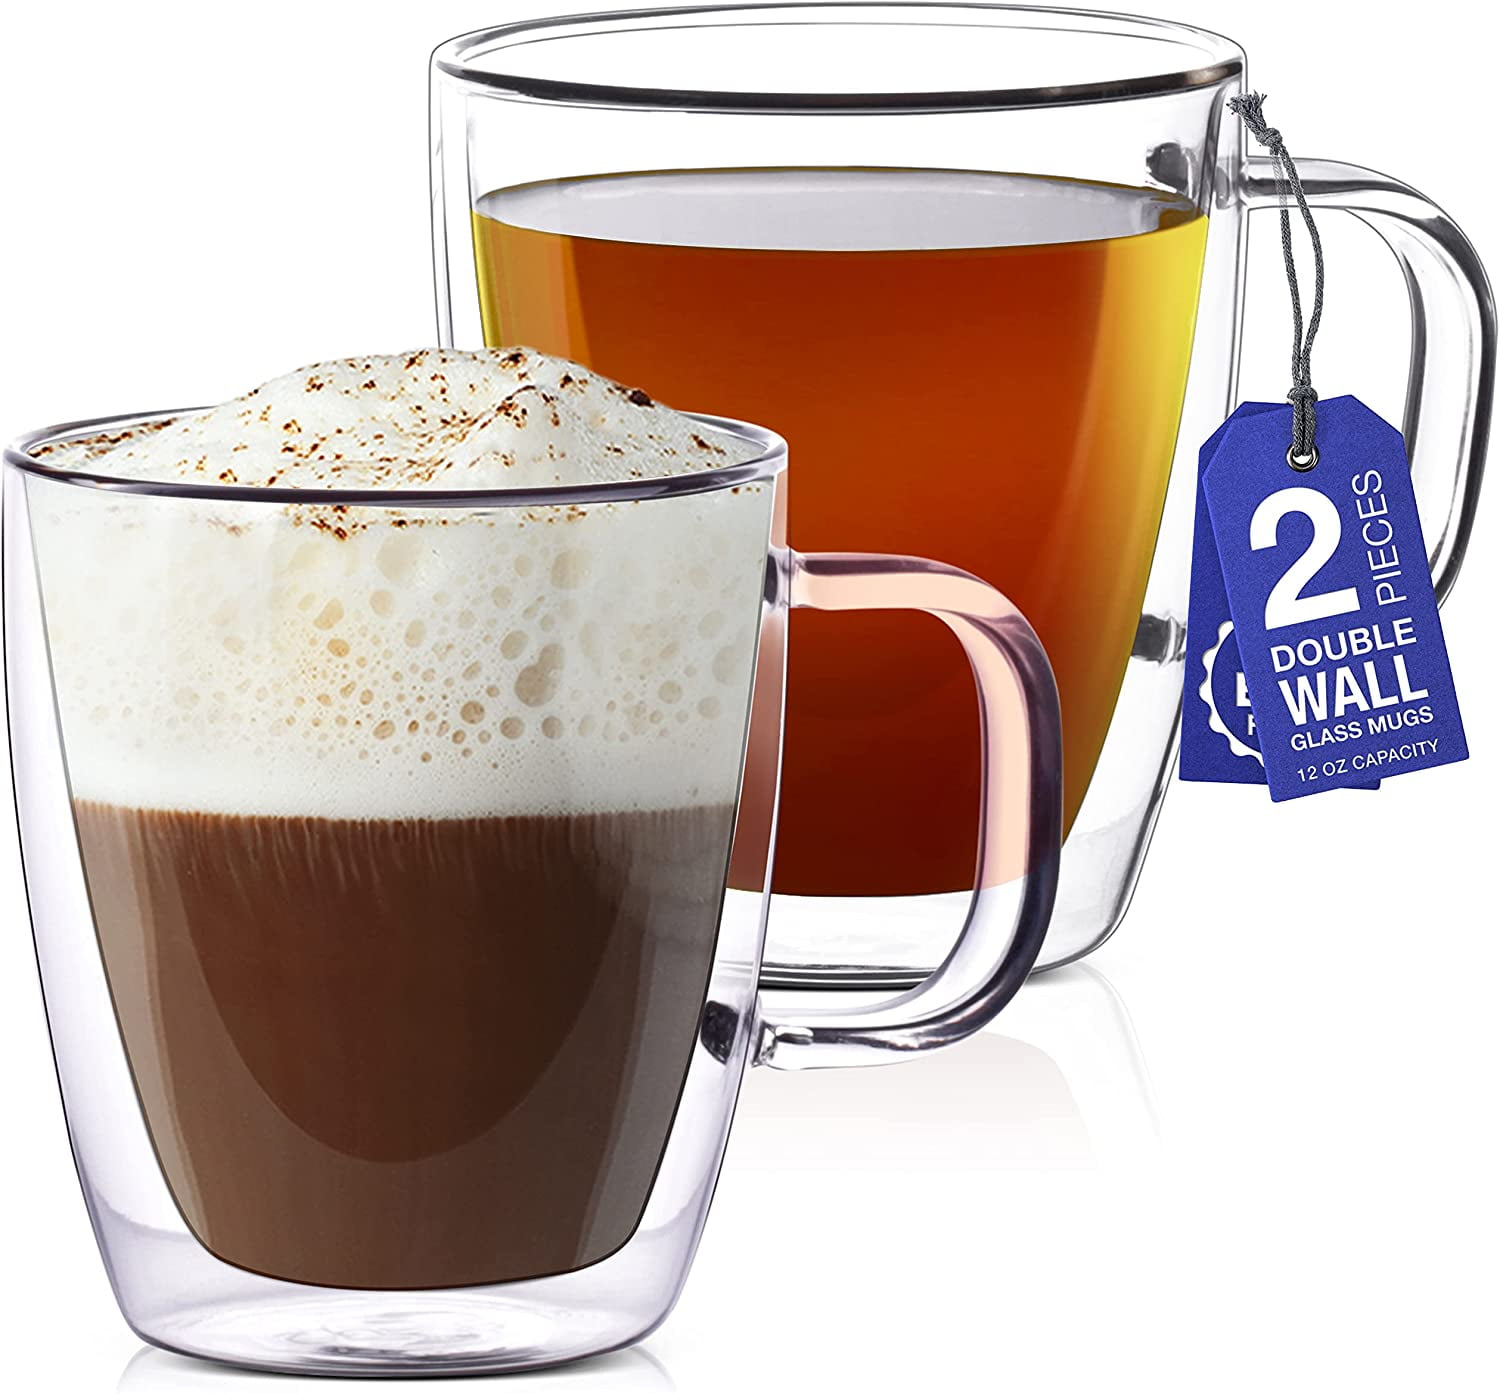 6 Epare Double Wall Mugs Set 12 Oz Clear Thermo Coffee Tea Cups Beverage  Glasses